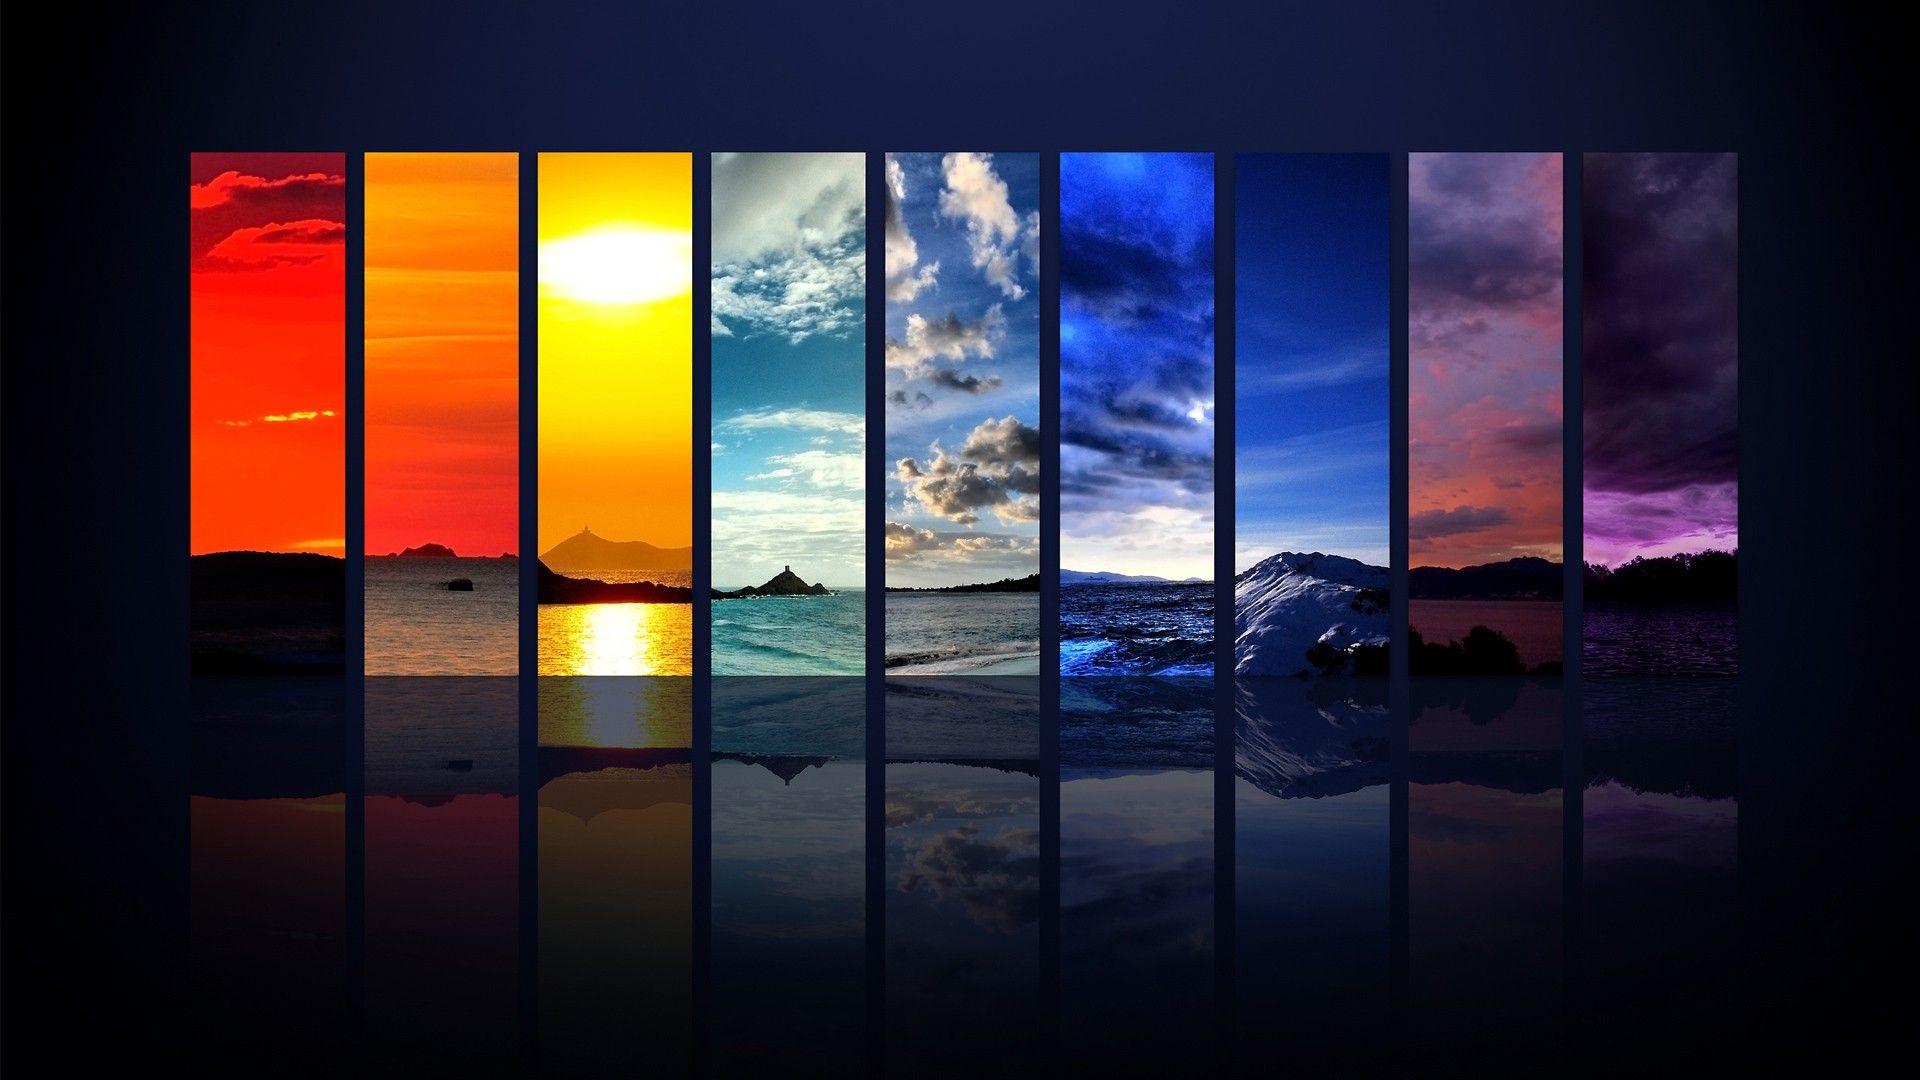 Res: 1920x1080, Awesome Desktop HD Wallpapers : Find best latest